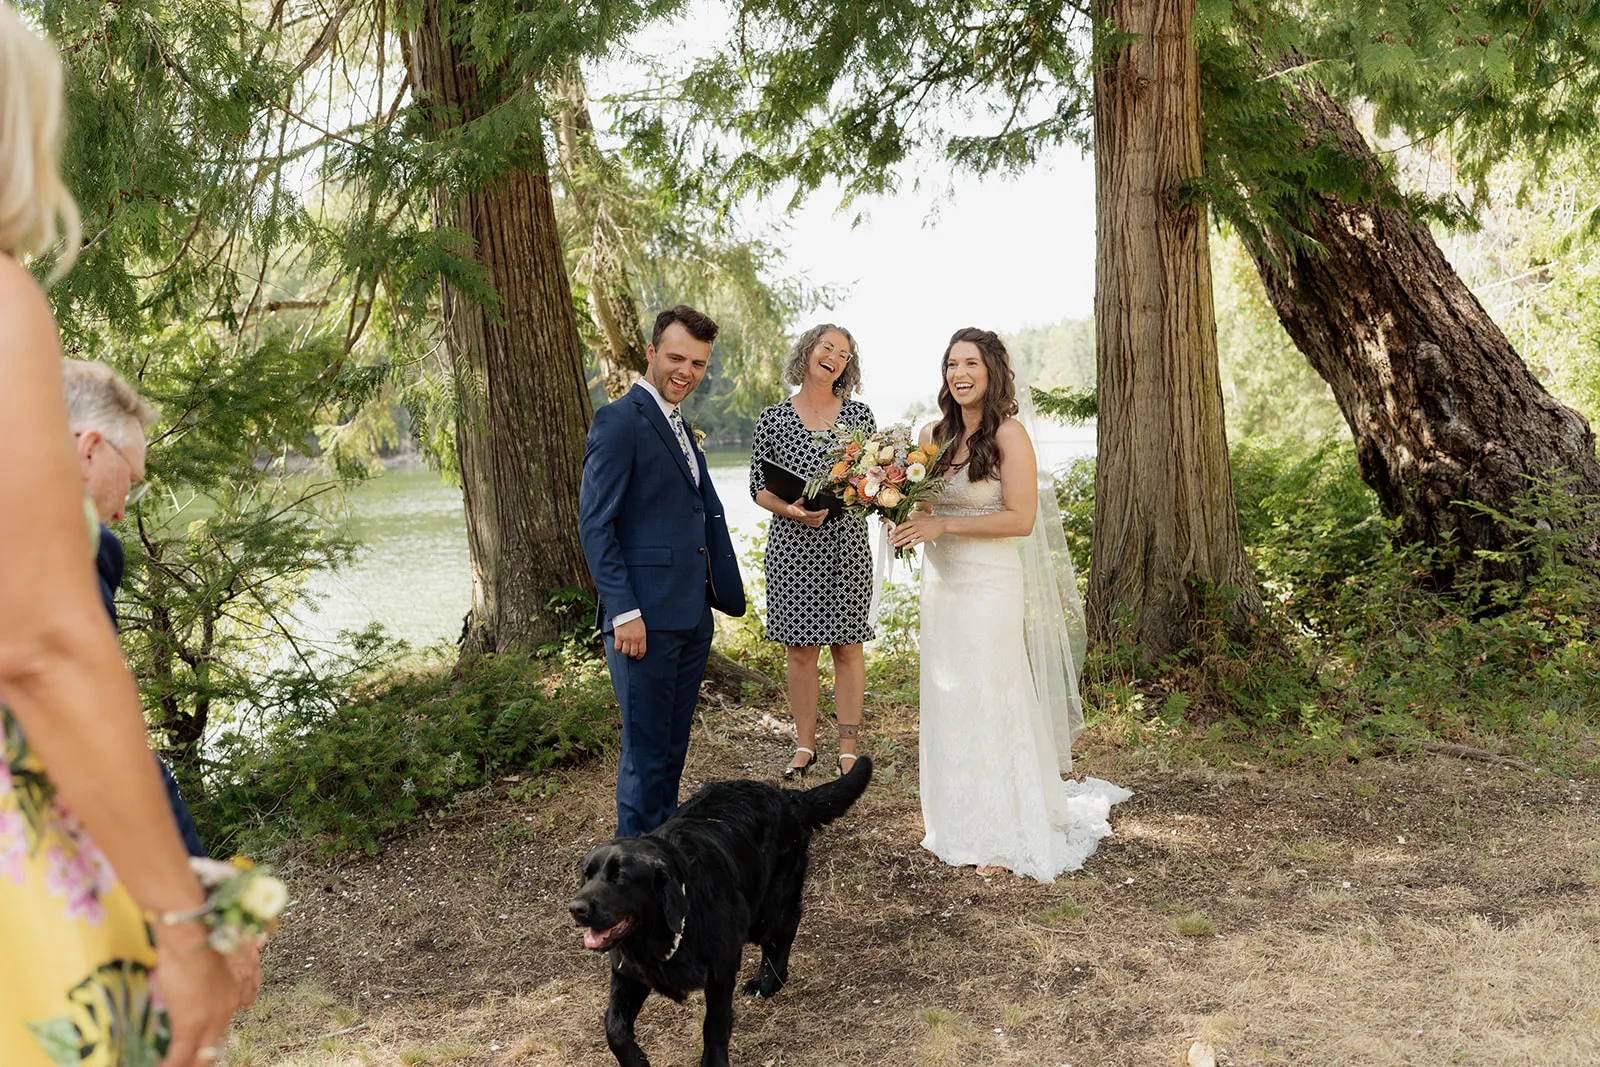 Officiant Amanda laughing with the bride and groom as their dog interrupts the ceremony